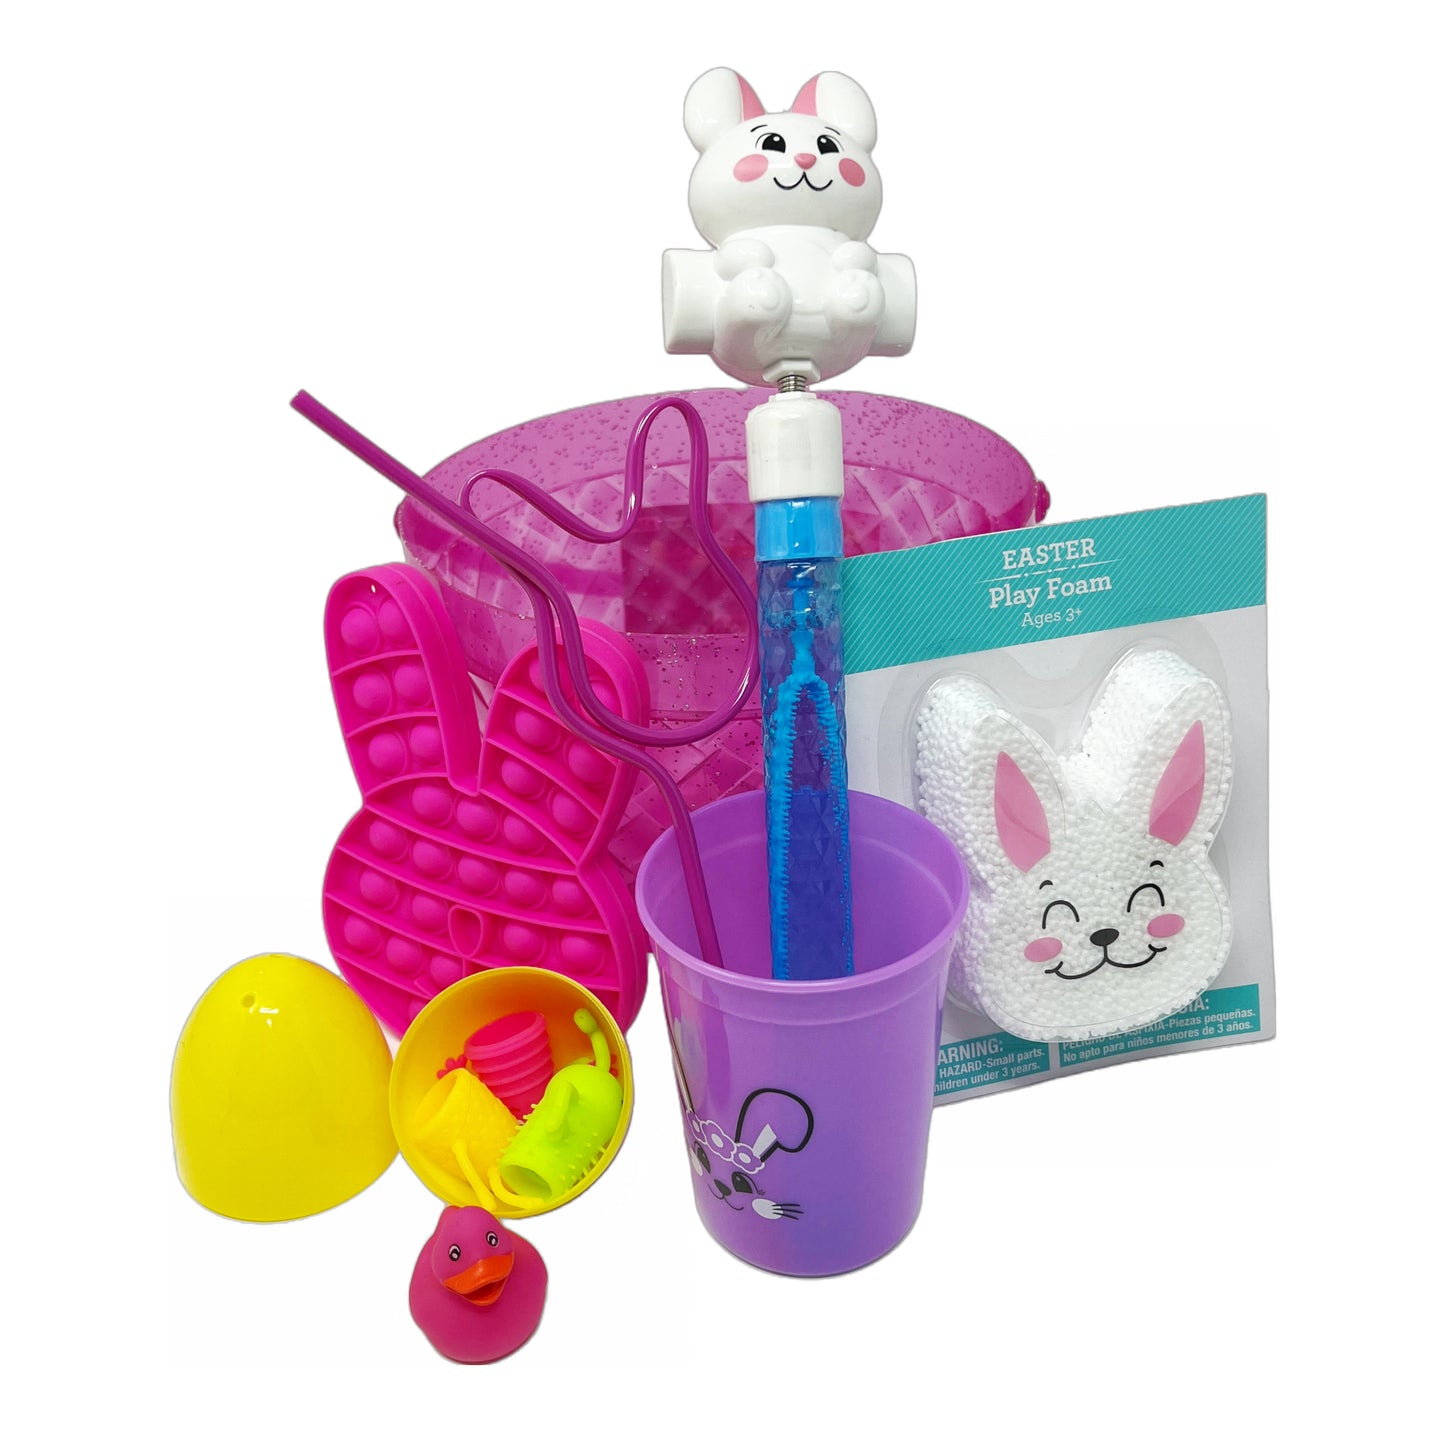 Cheep N Cheerful Girls Build a Basket, LED Easter Basket with Novelty Toys, Easter Basket Kits